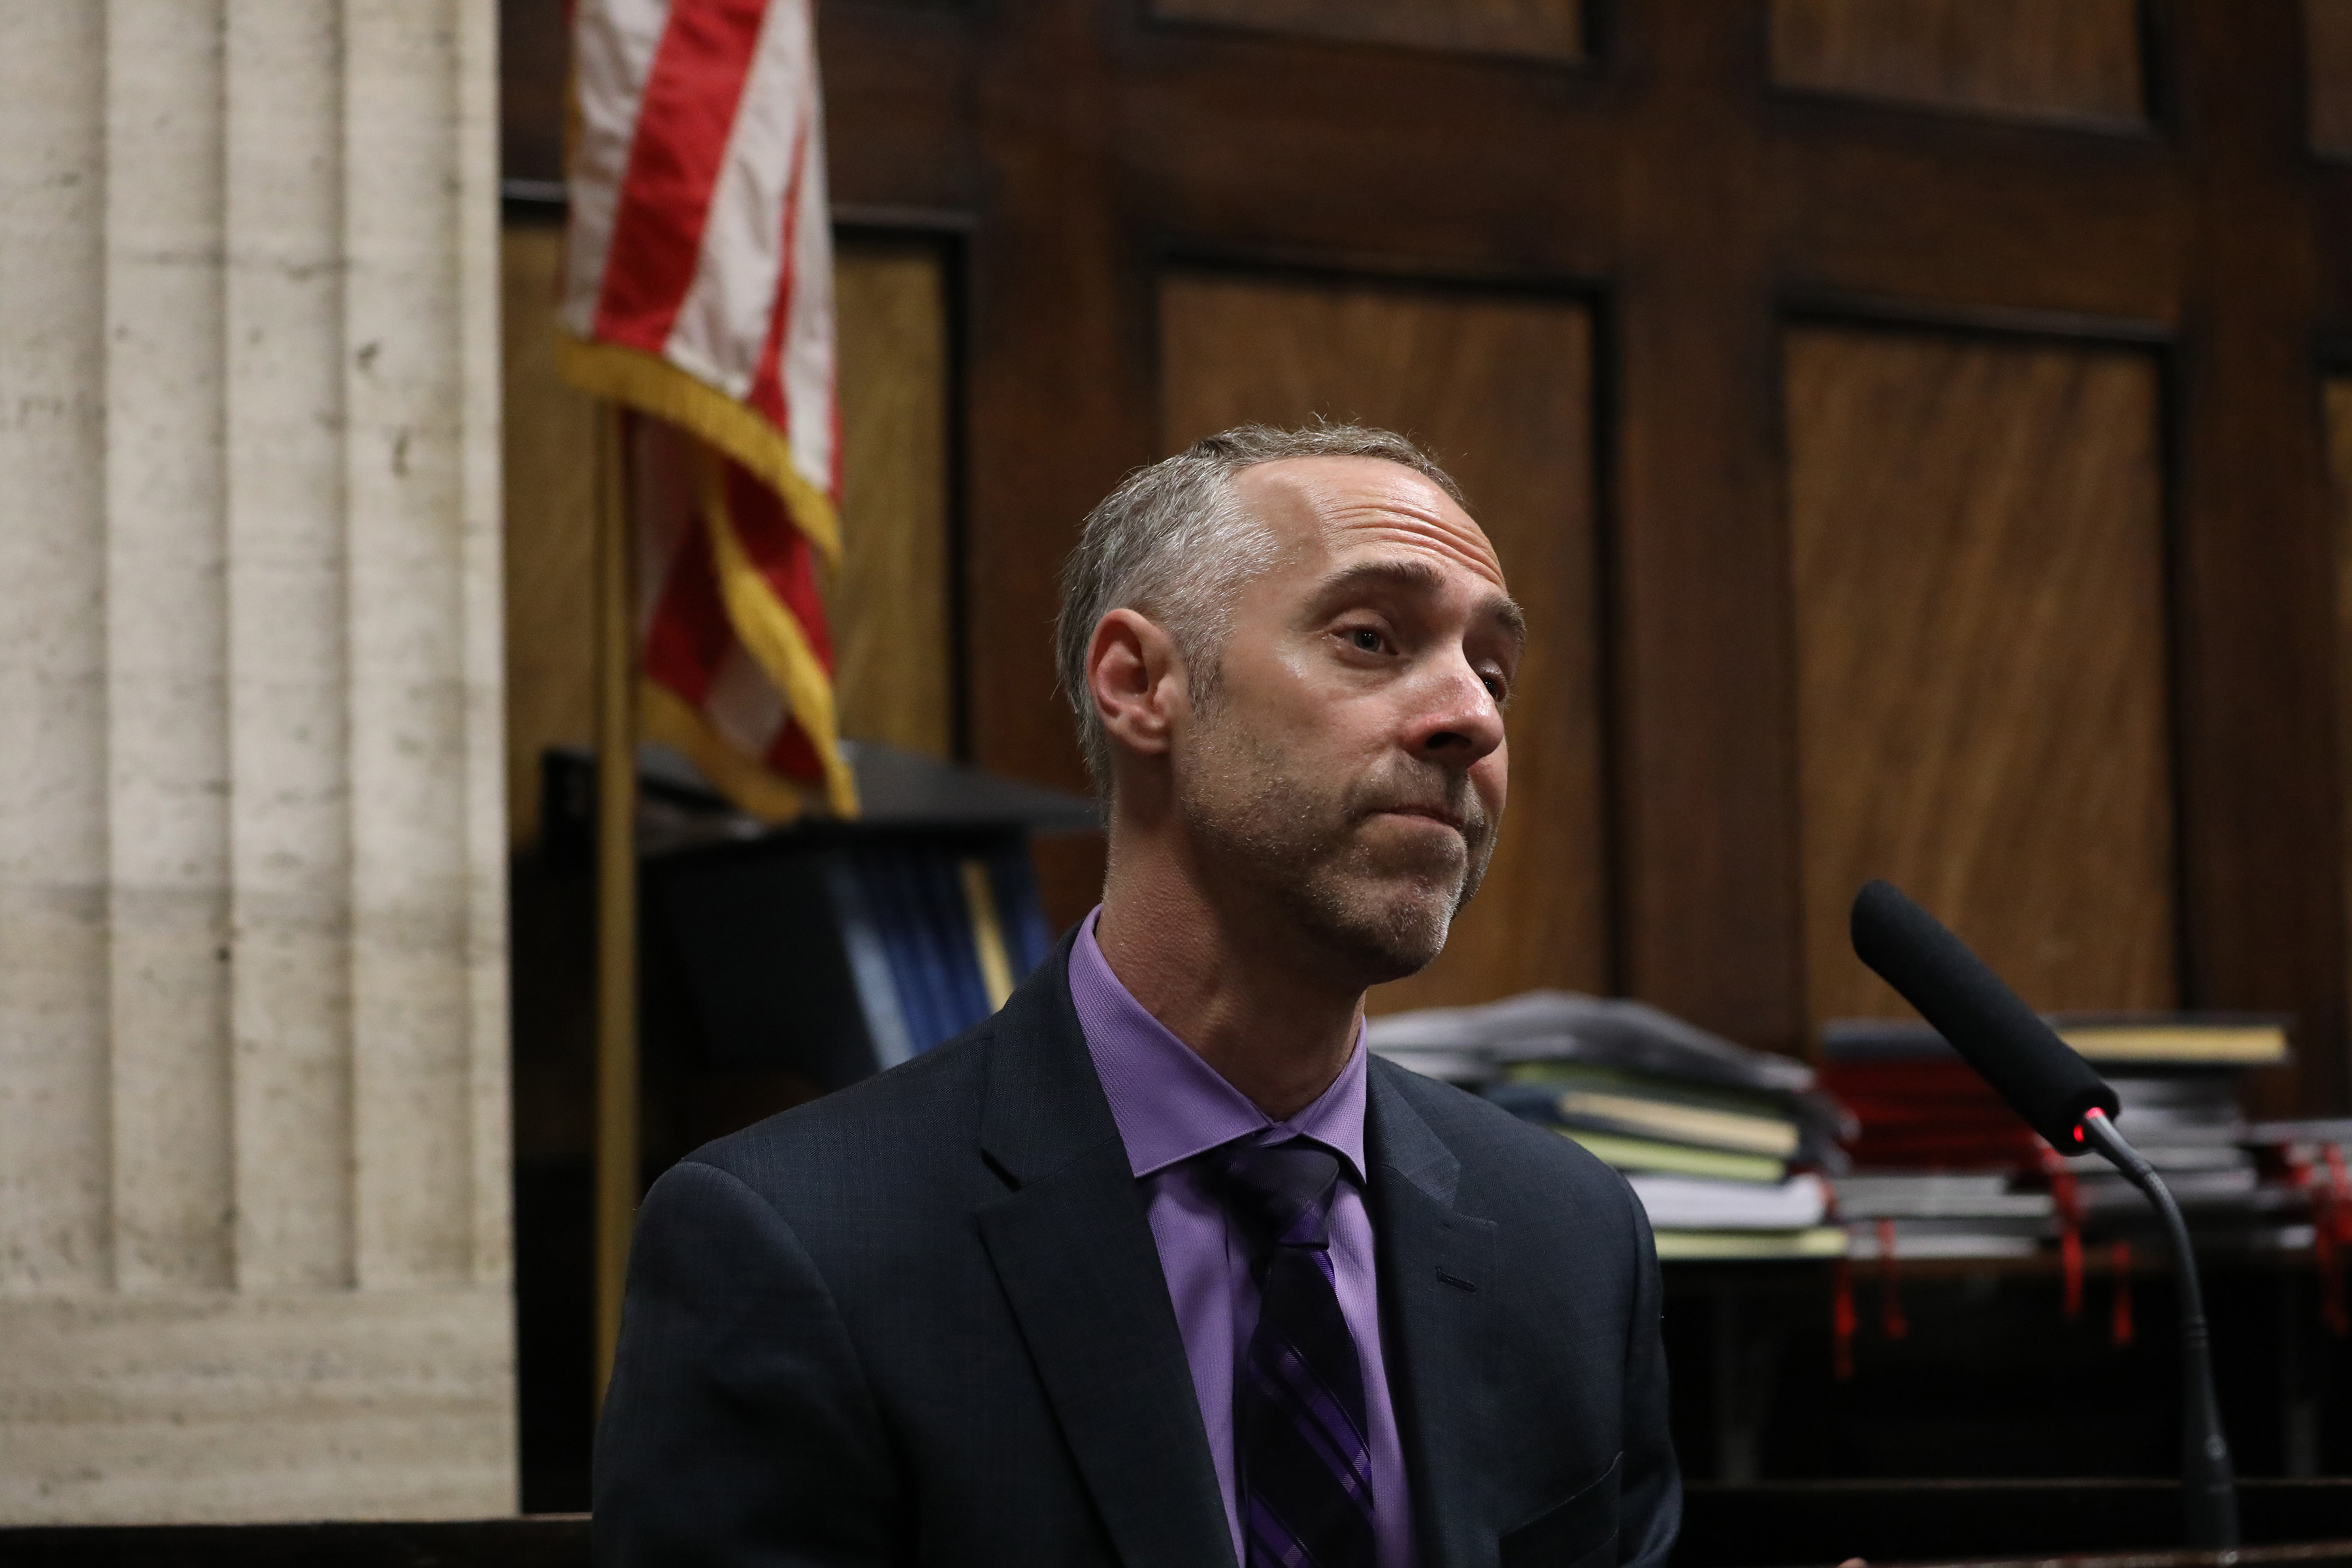 Witness Bryan Edelman, a trial consultant hired by the defense to conduct change-of-venue polls, answers questions at the hearing in the Jason Van Dyke case at Leighton Criminal Court in Chicago Wednesday April 18, 2018.    (Nancy Stone / Chicago Tribune / Pool)